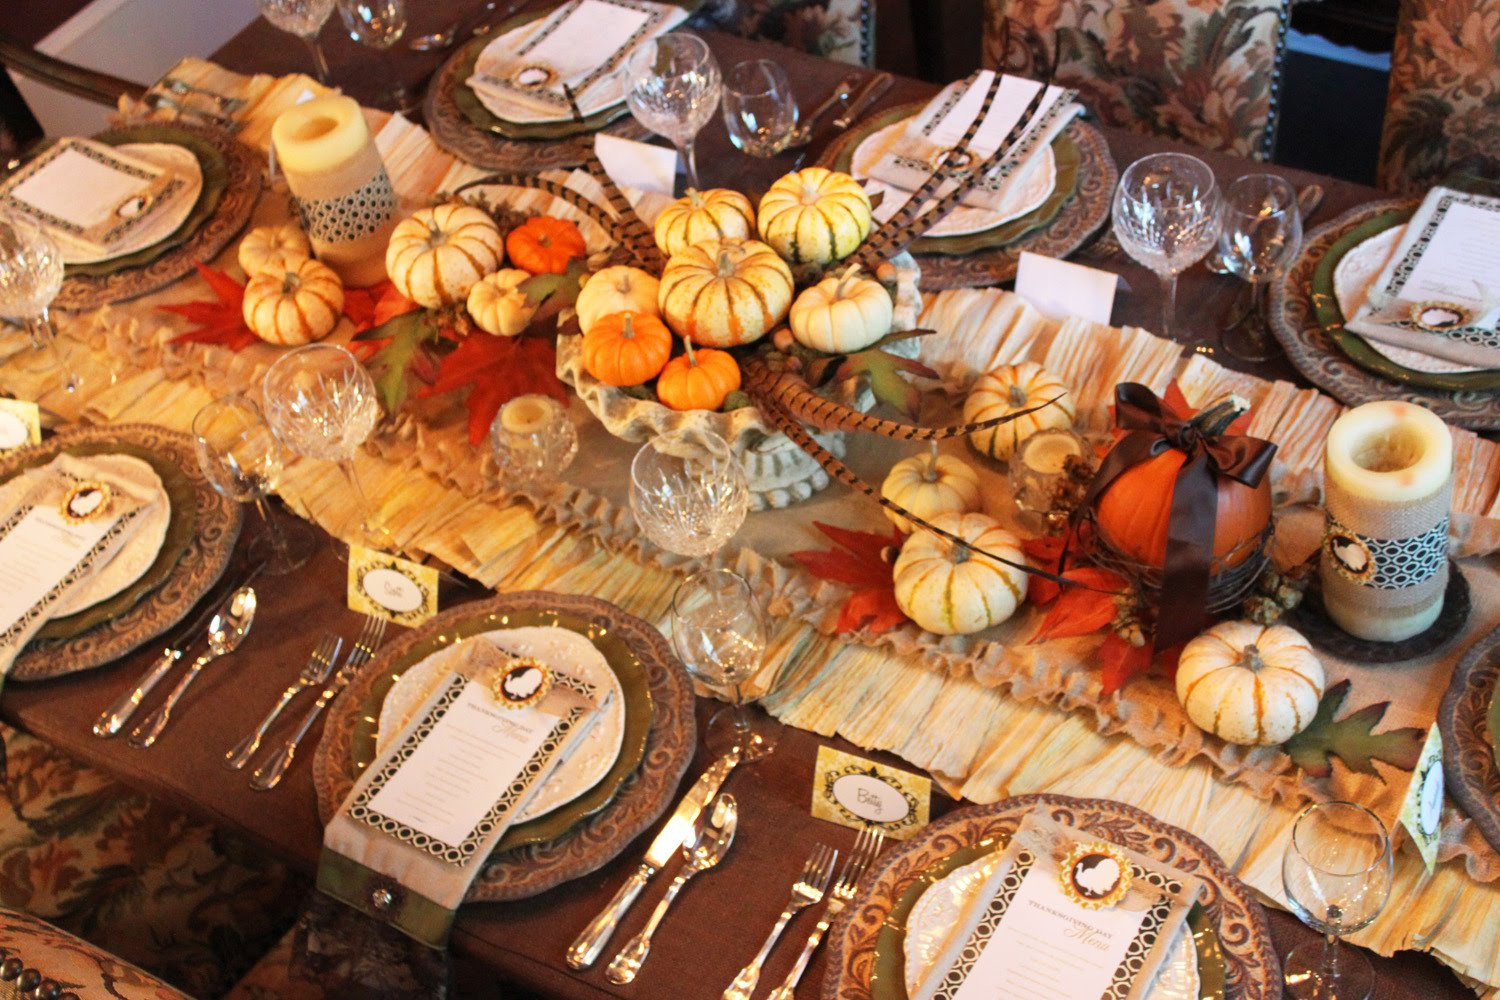 Table Decorations For Thanksgiving
 A feast for the eyes Thanksgiving dinner table decorations